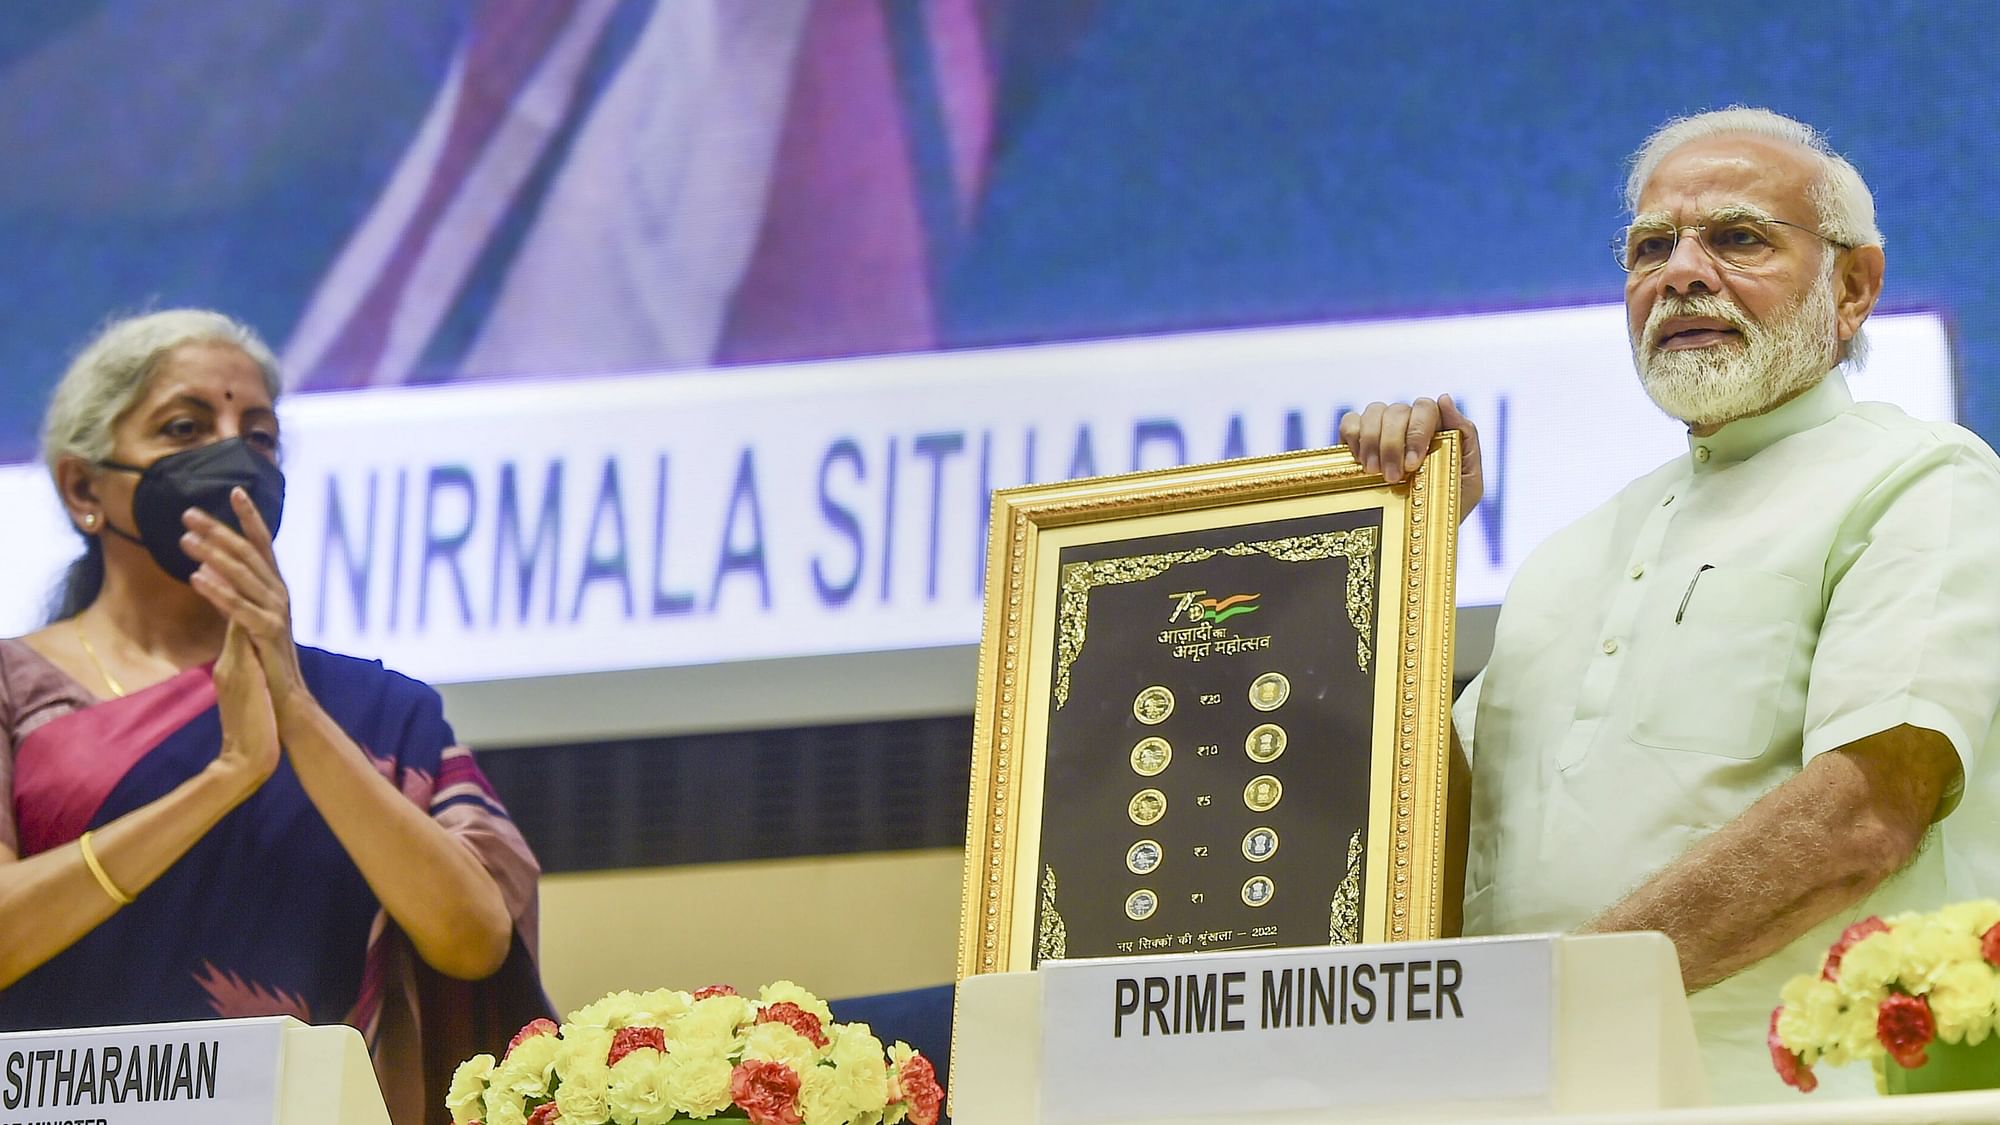 <div class="paragraphs"><p>Prime Minister Narendra Modi launched a special series of coins of denominations Re 1, Rs 2, Rs 5, Rs 10, and Rs 20, that are also 'visually impaired friendly'.</p></div>